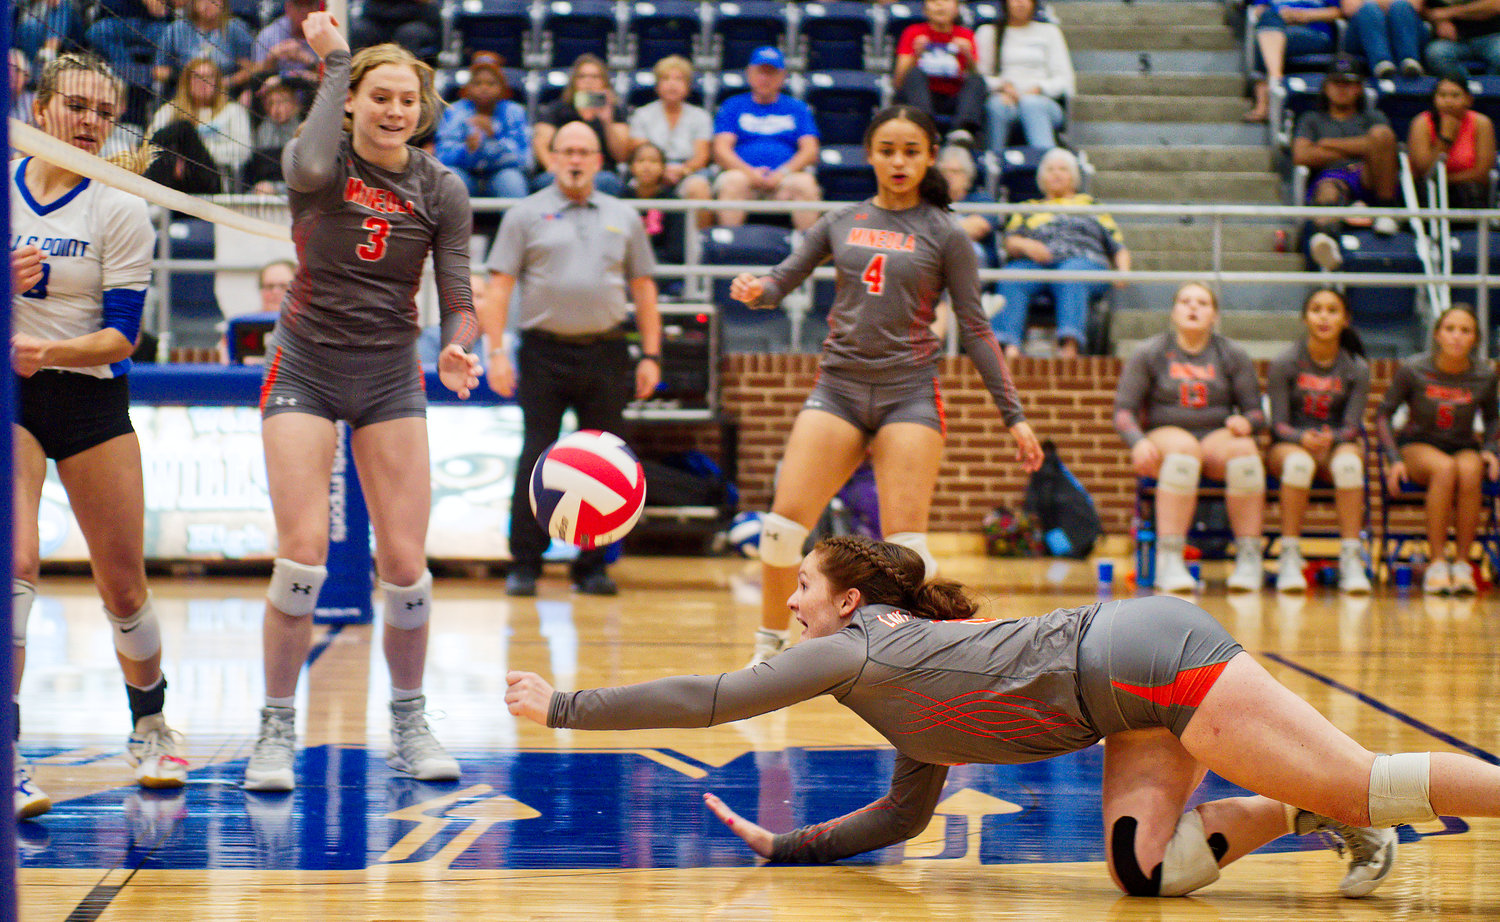 Gracie Finley reaches to save a shot for Mineola. [view more volleyball shots]